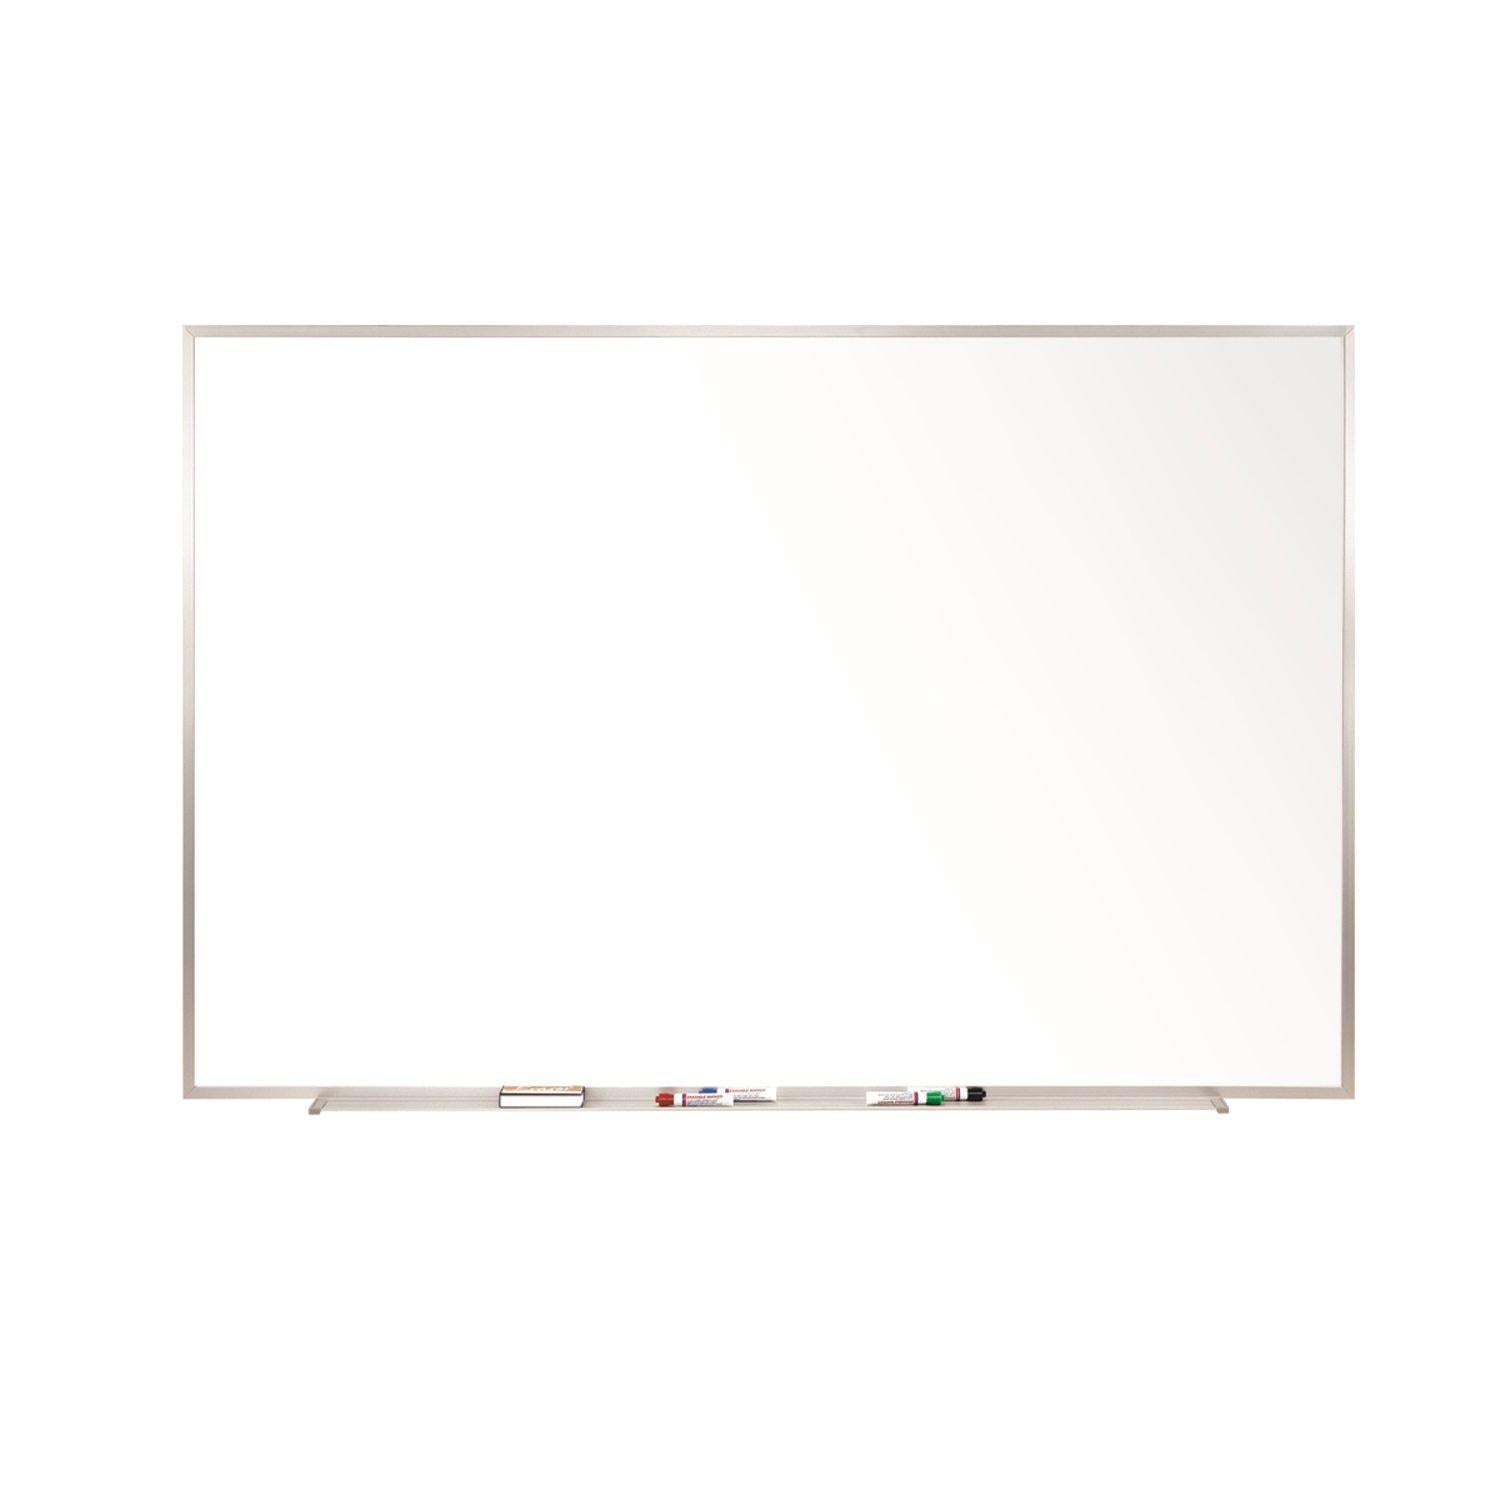 Magnetic Porcelain Whiteboard with Detachable Marker Tray, Satin Aluminum Frame, 4' H x 7' 4" W, LIFETIME WARRANTY